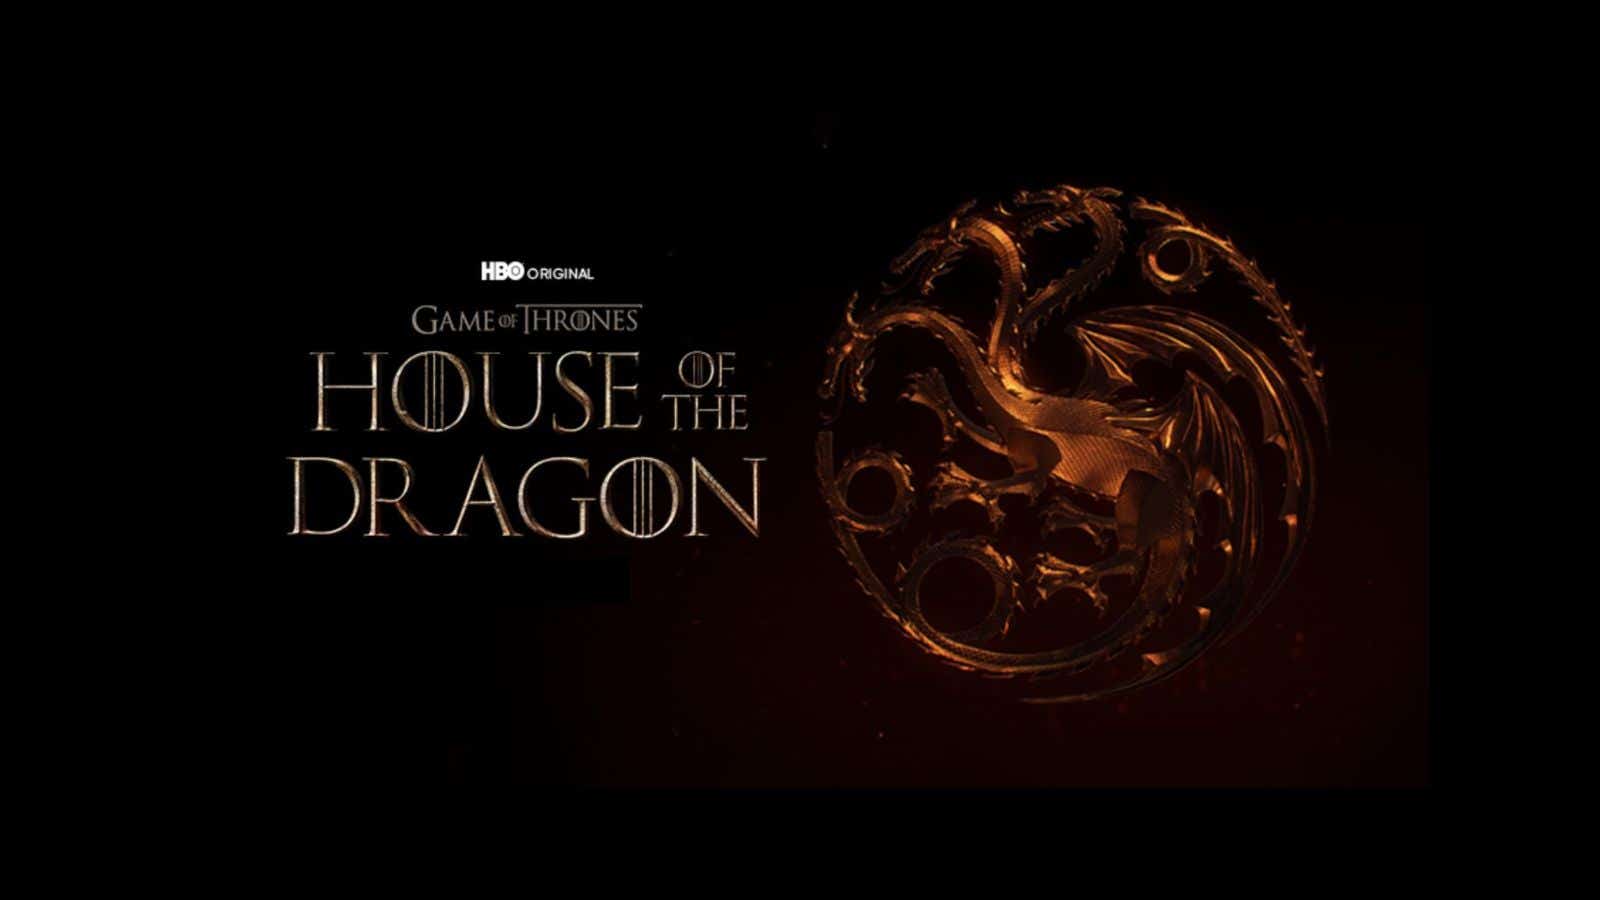 House of the dragon title logo